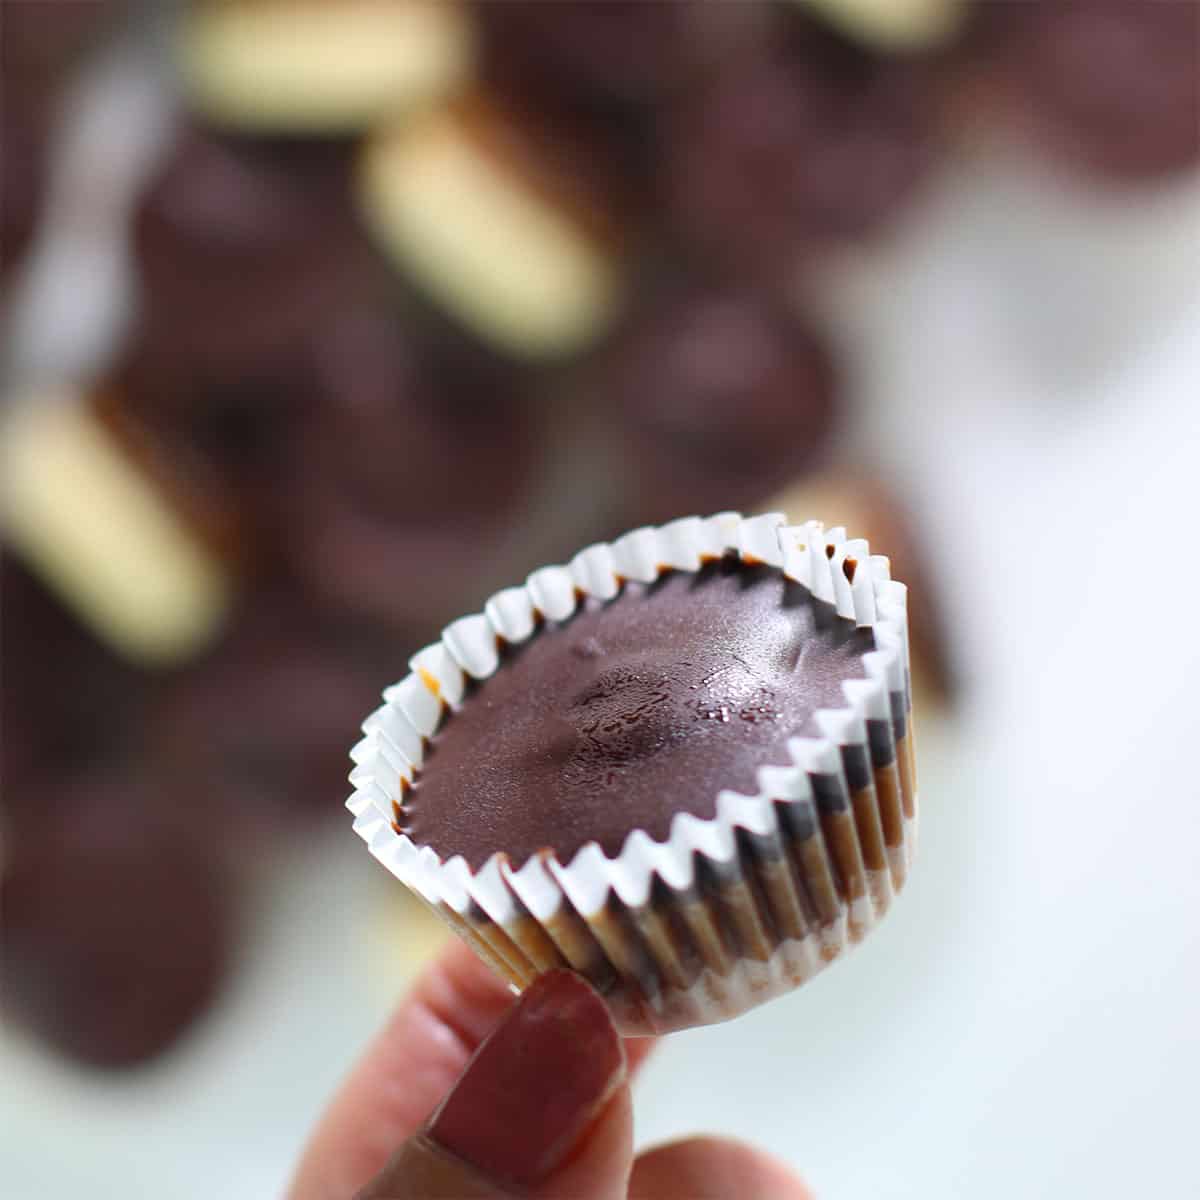 twix cups or bites held by hand.